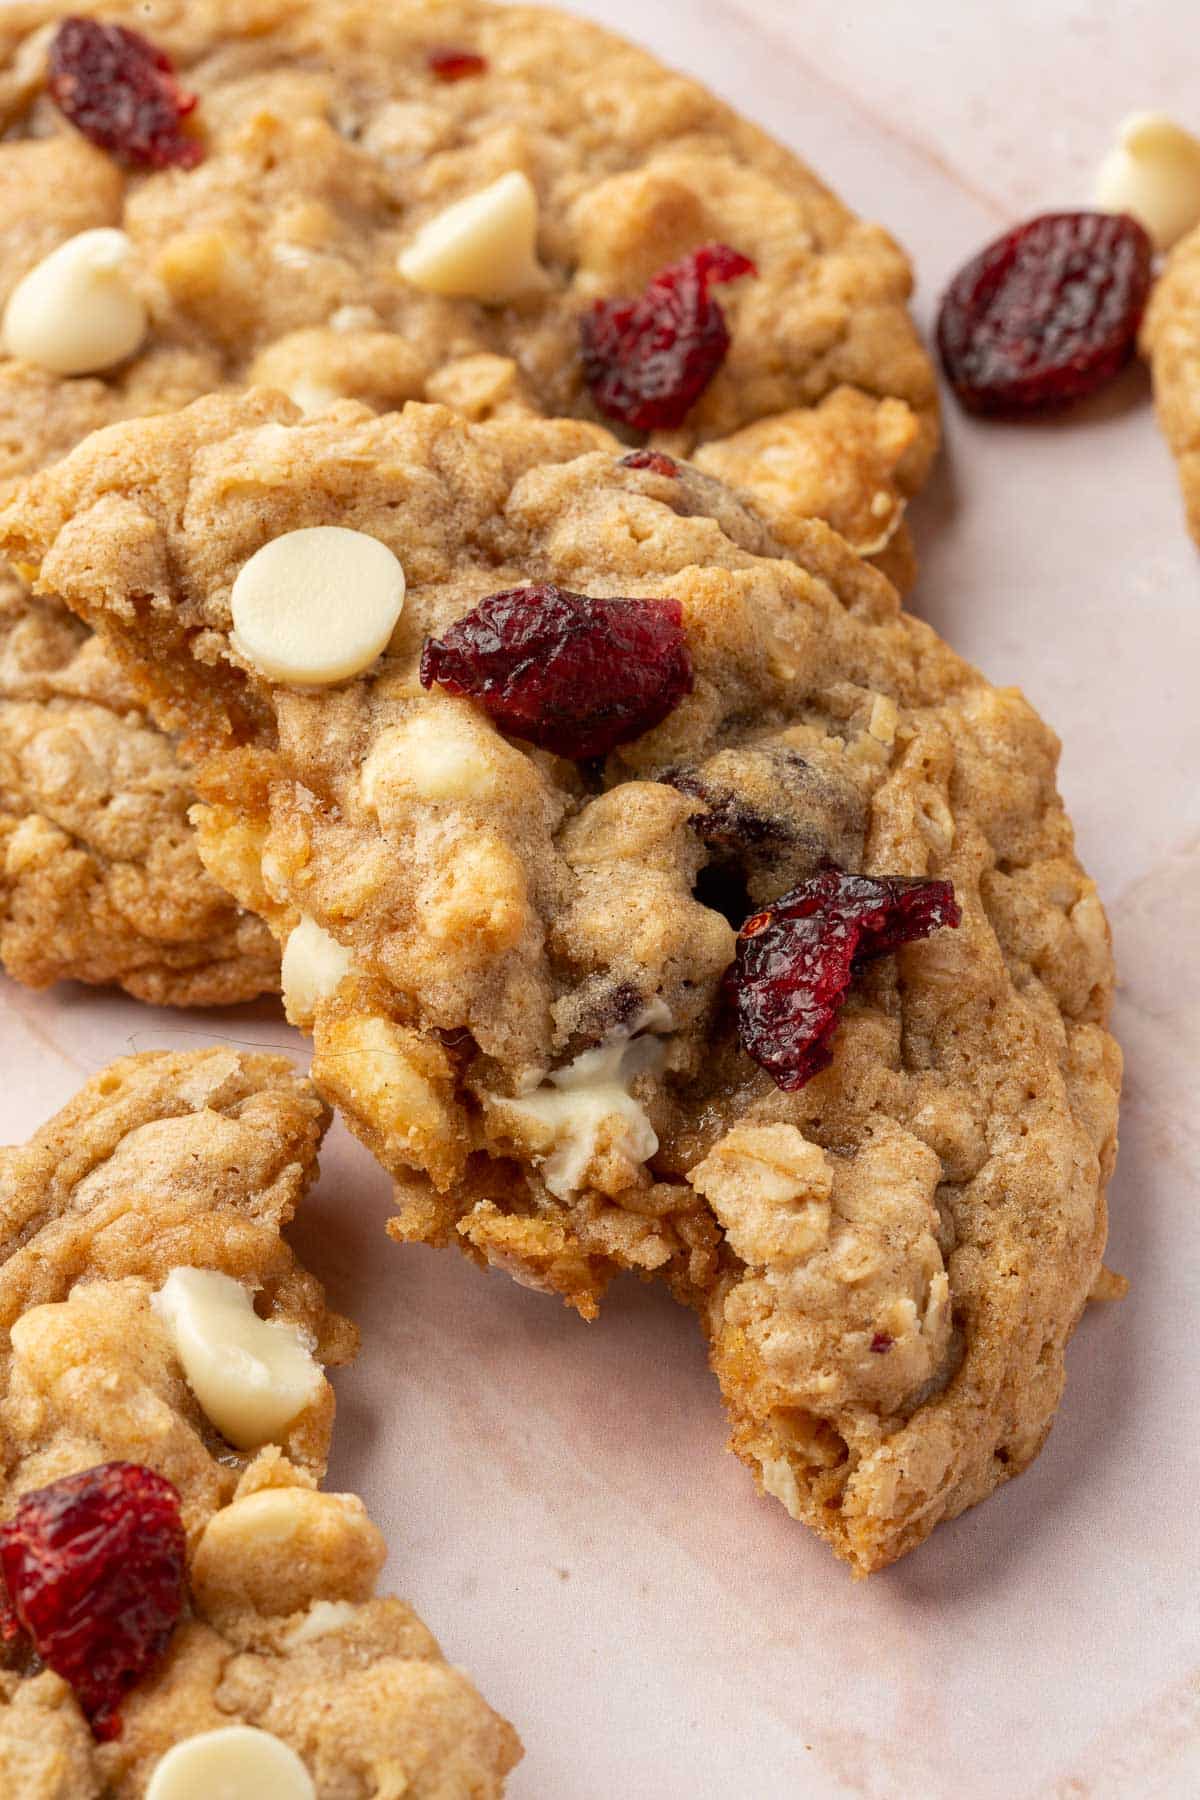 A gluten-free oatmeal craisin cookie that has been ripped in half.